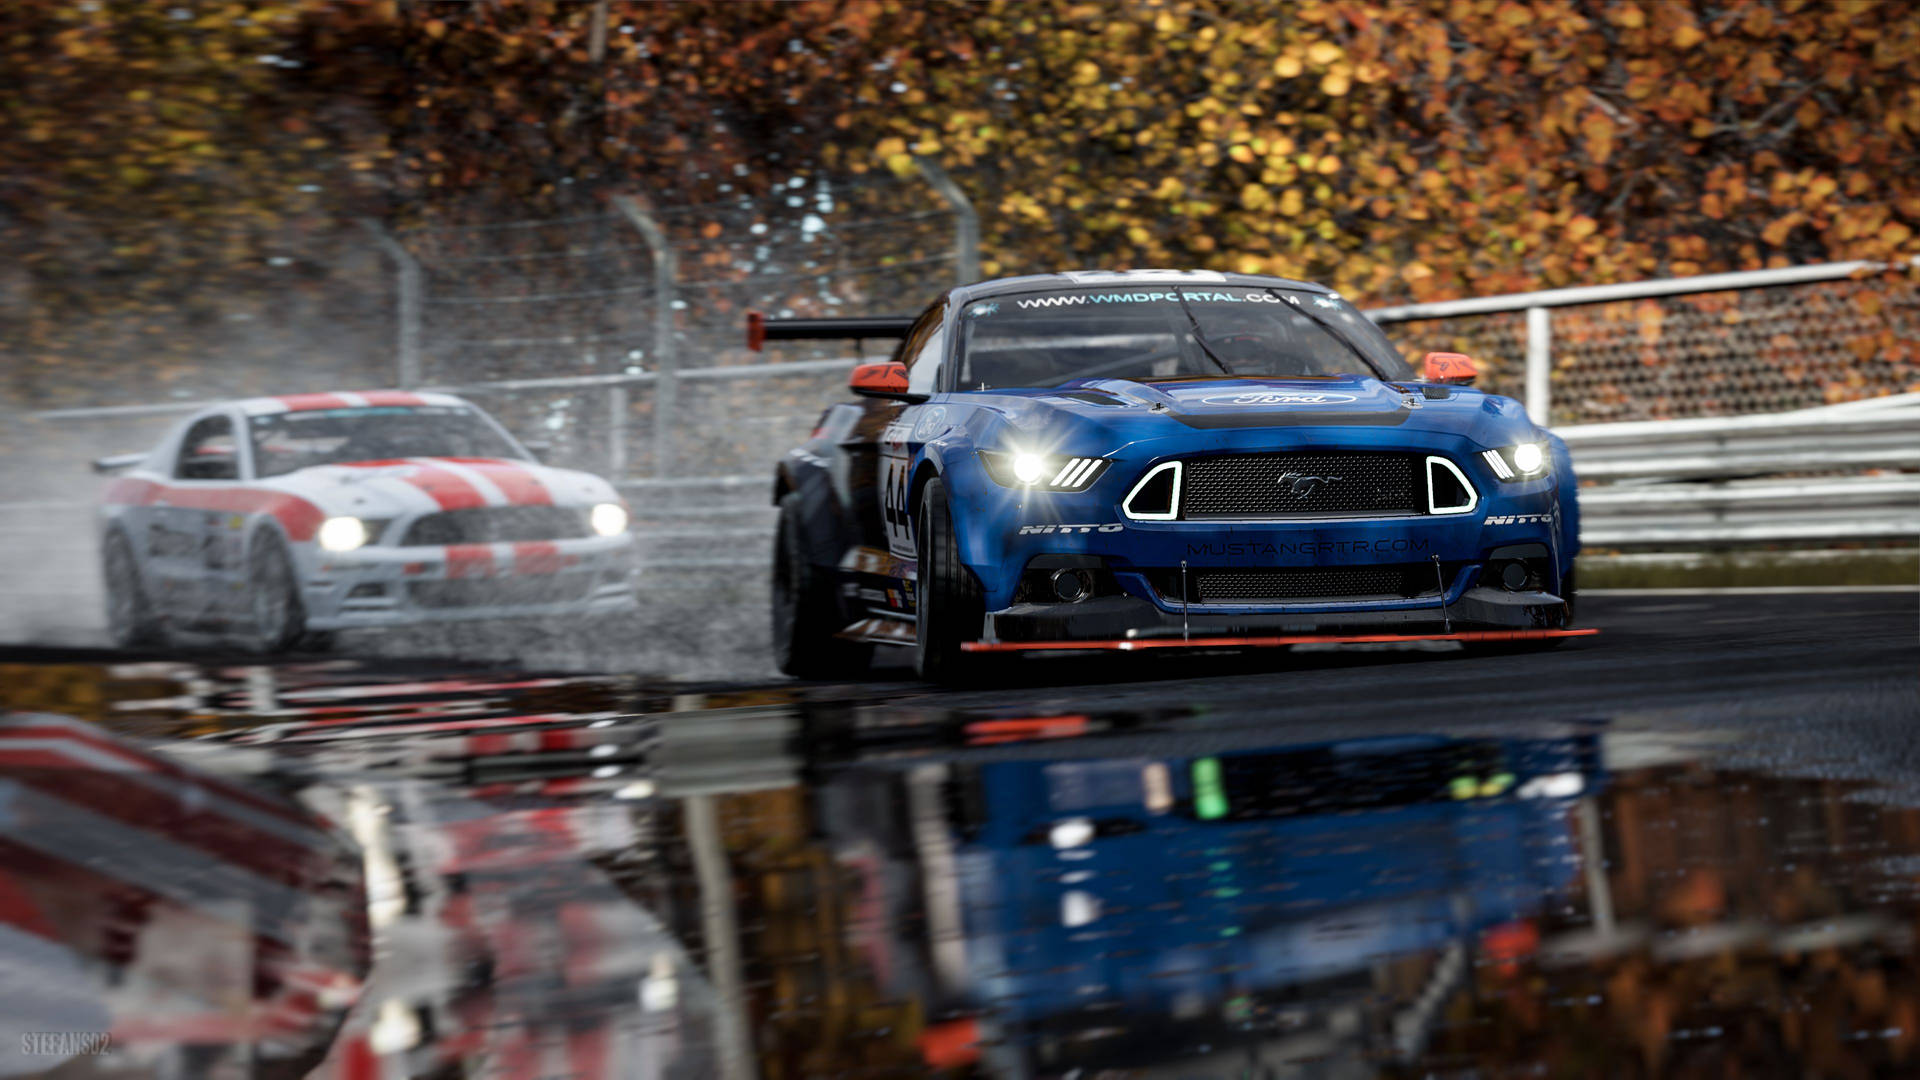 Exhilarating Race With Ford Mustang Rtr In Project Cars 2